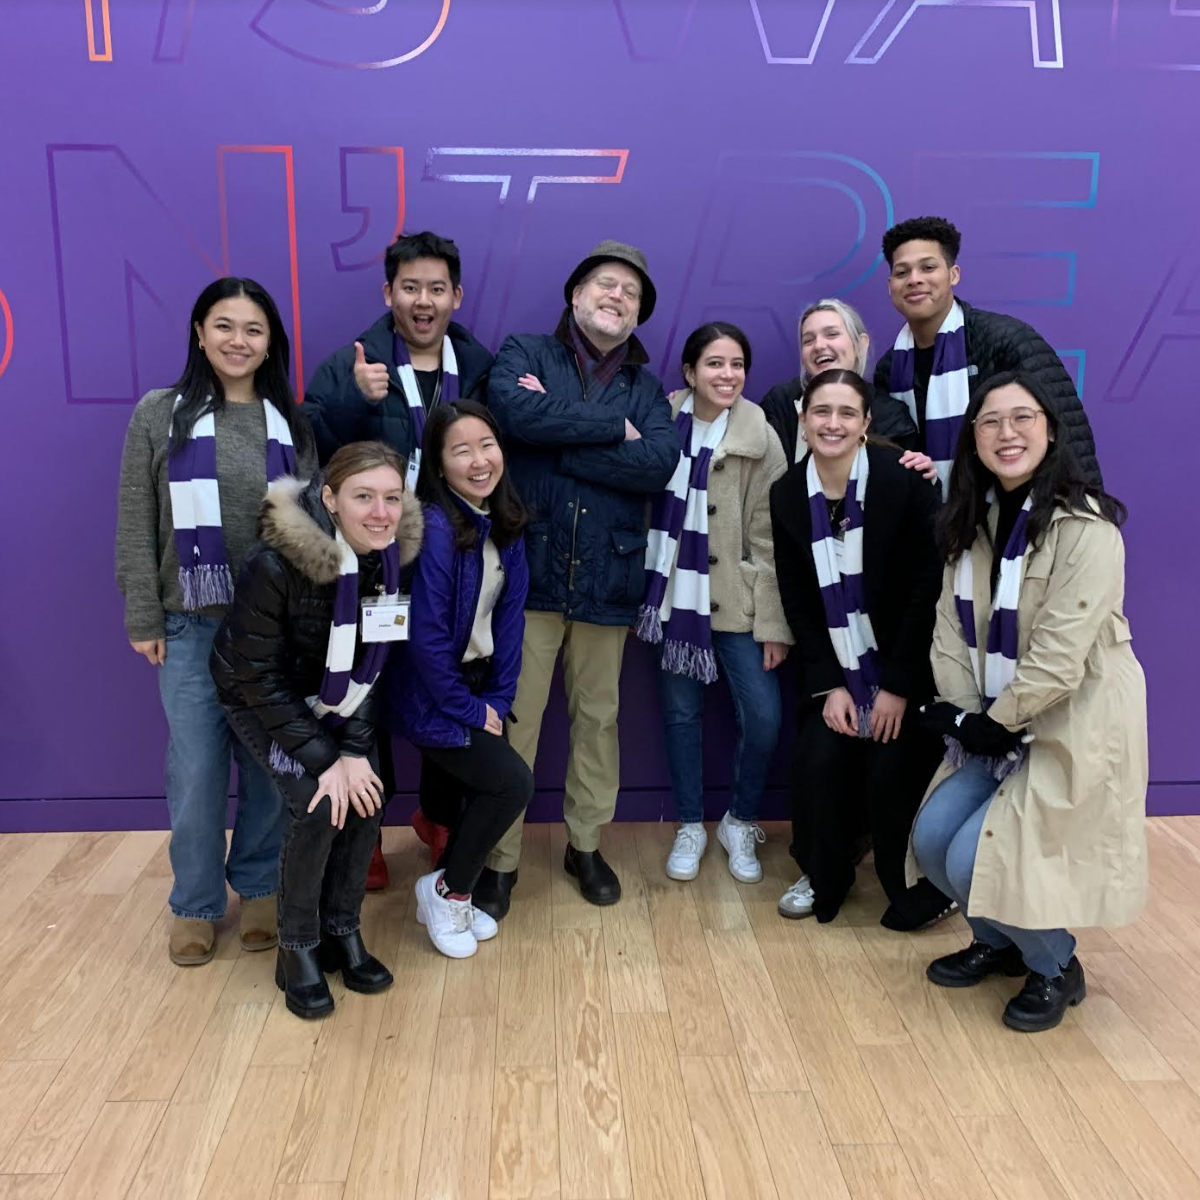 Admissions Ambassadors smiling for the camera in front of an NYU Violet wall.